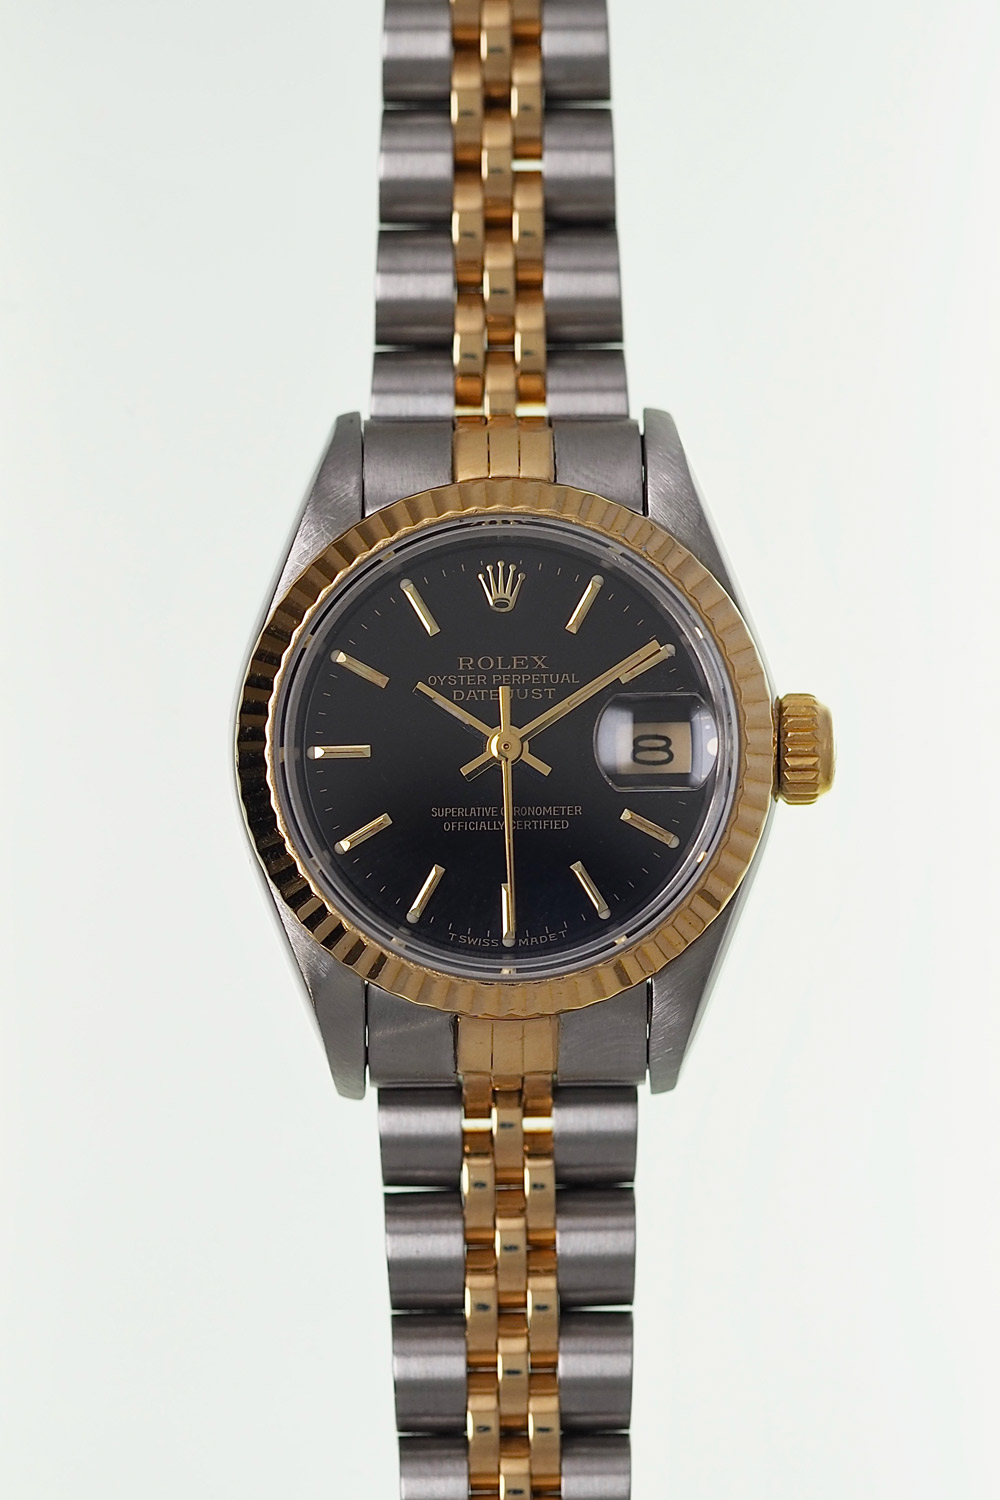 ROLEX(ロレックス) ｜OYSTER PERPETUAL DATE JUST 自動巻 Cal.2135 SS 